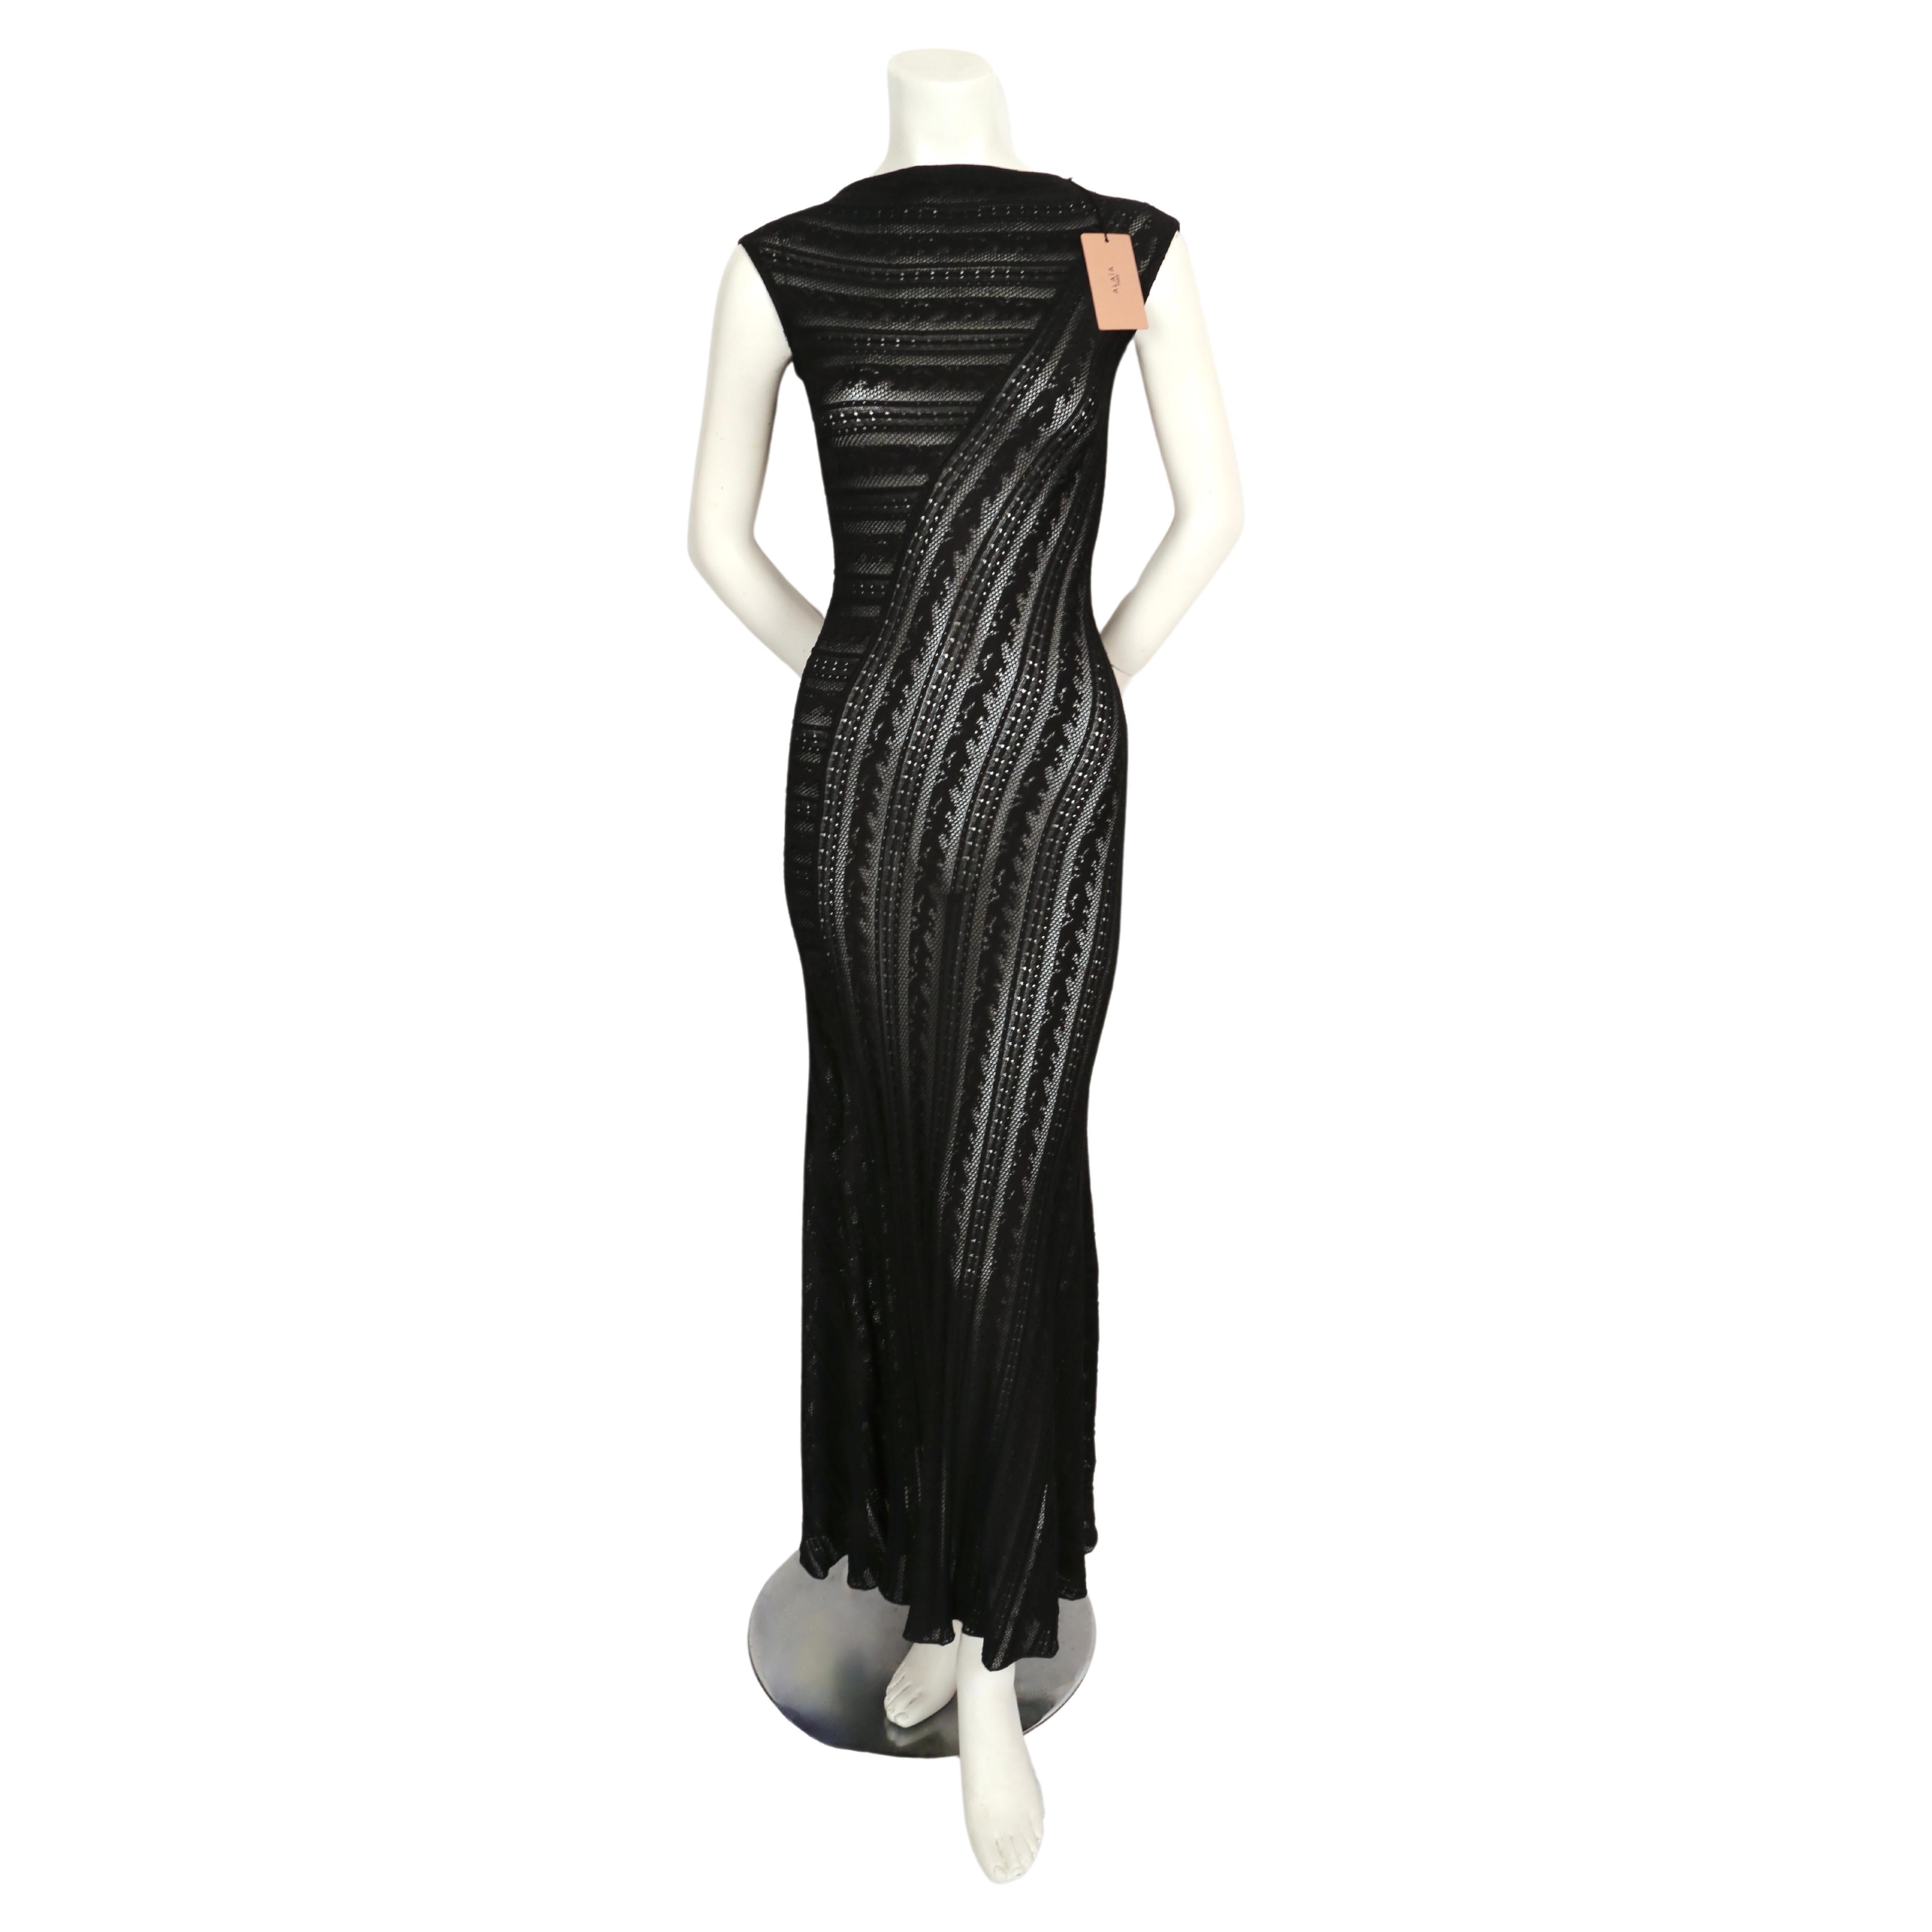 Long black lace knit dress designed by Azzedine Alaia. The high neckline and beautiful seaming creates a very flattering fit. French size 38 which best fits a US 2-6. Approximate measurements (unstretched): shoulder 14